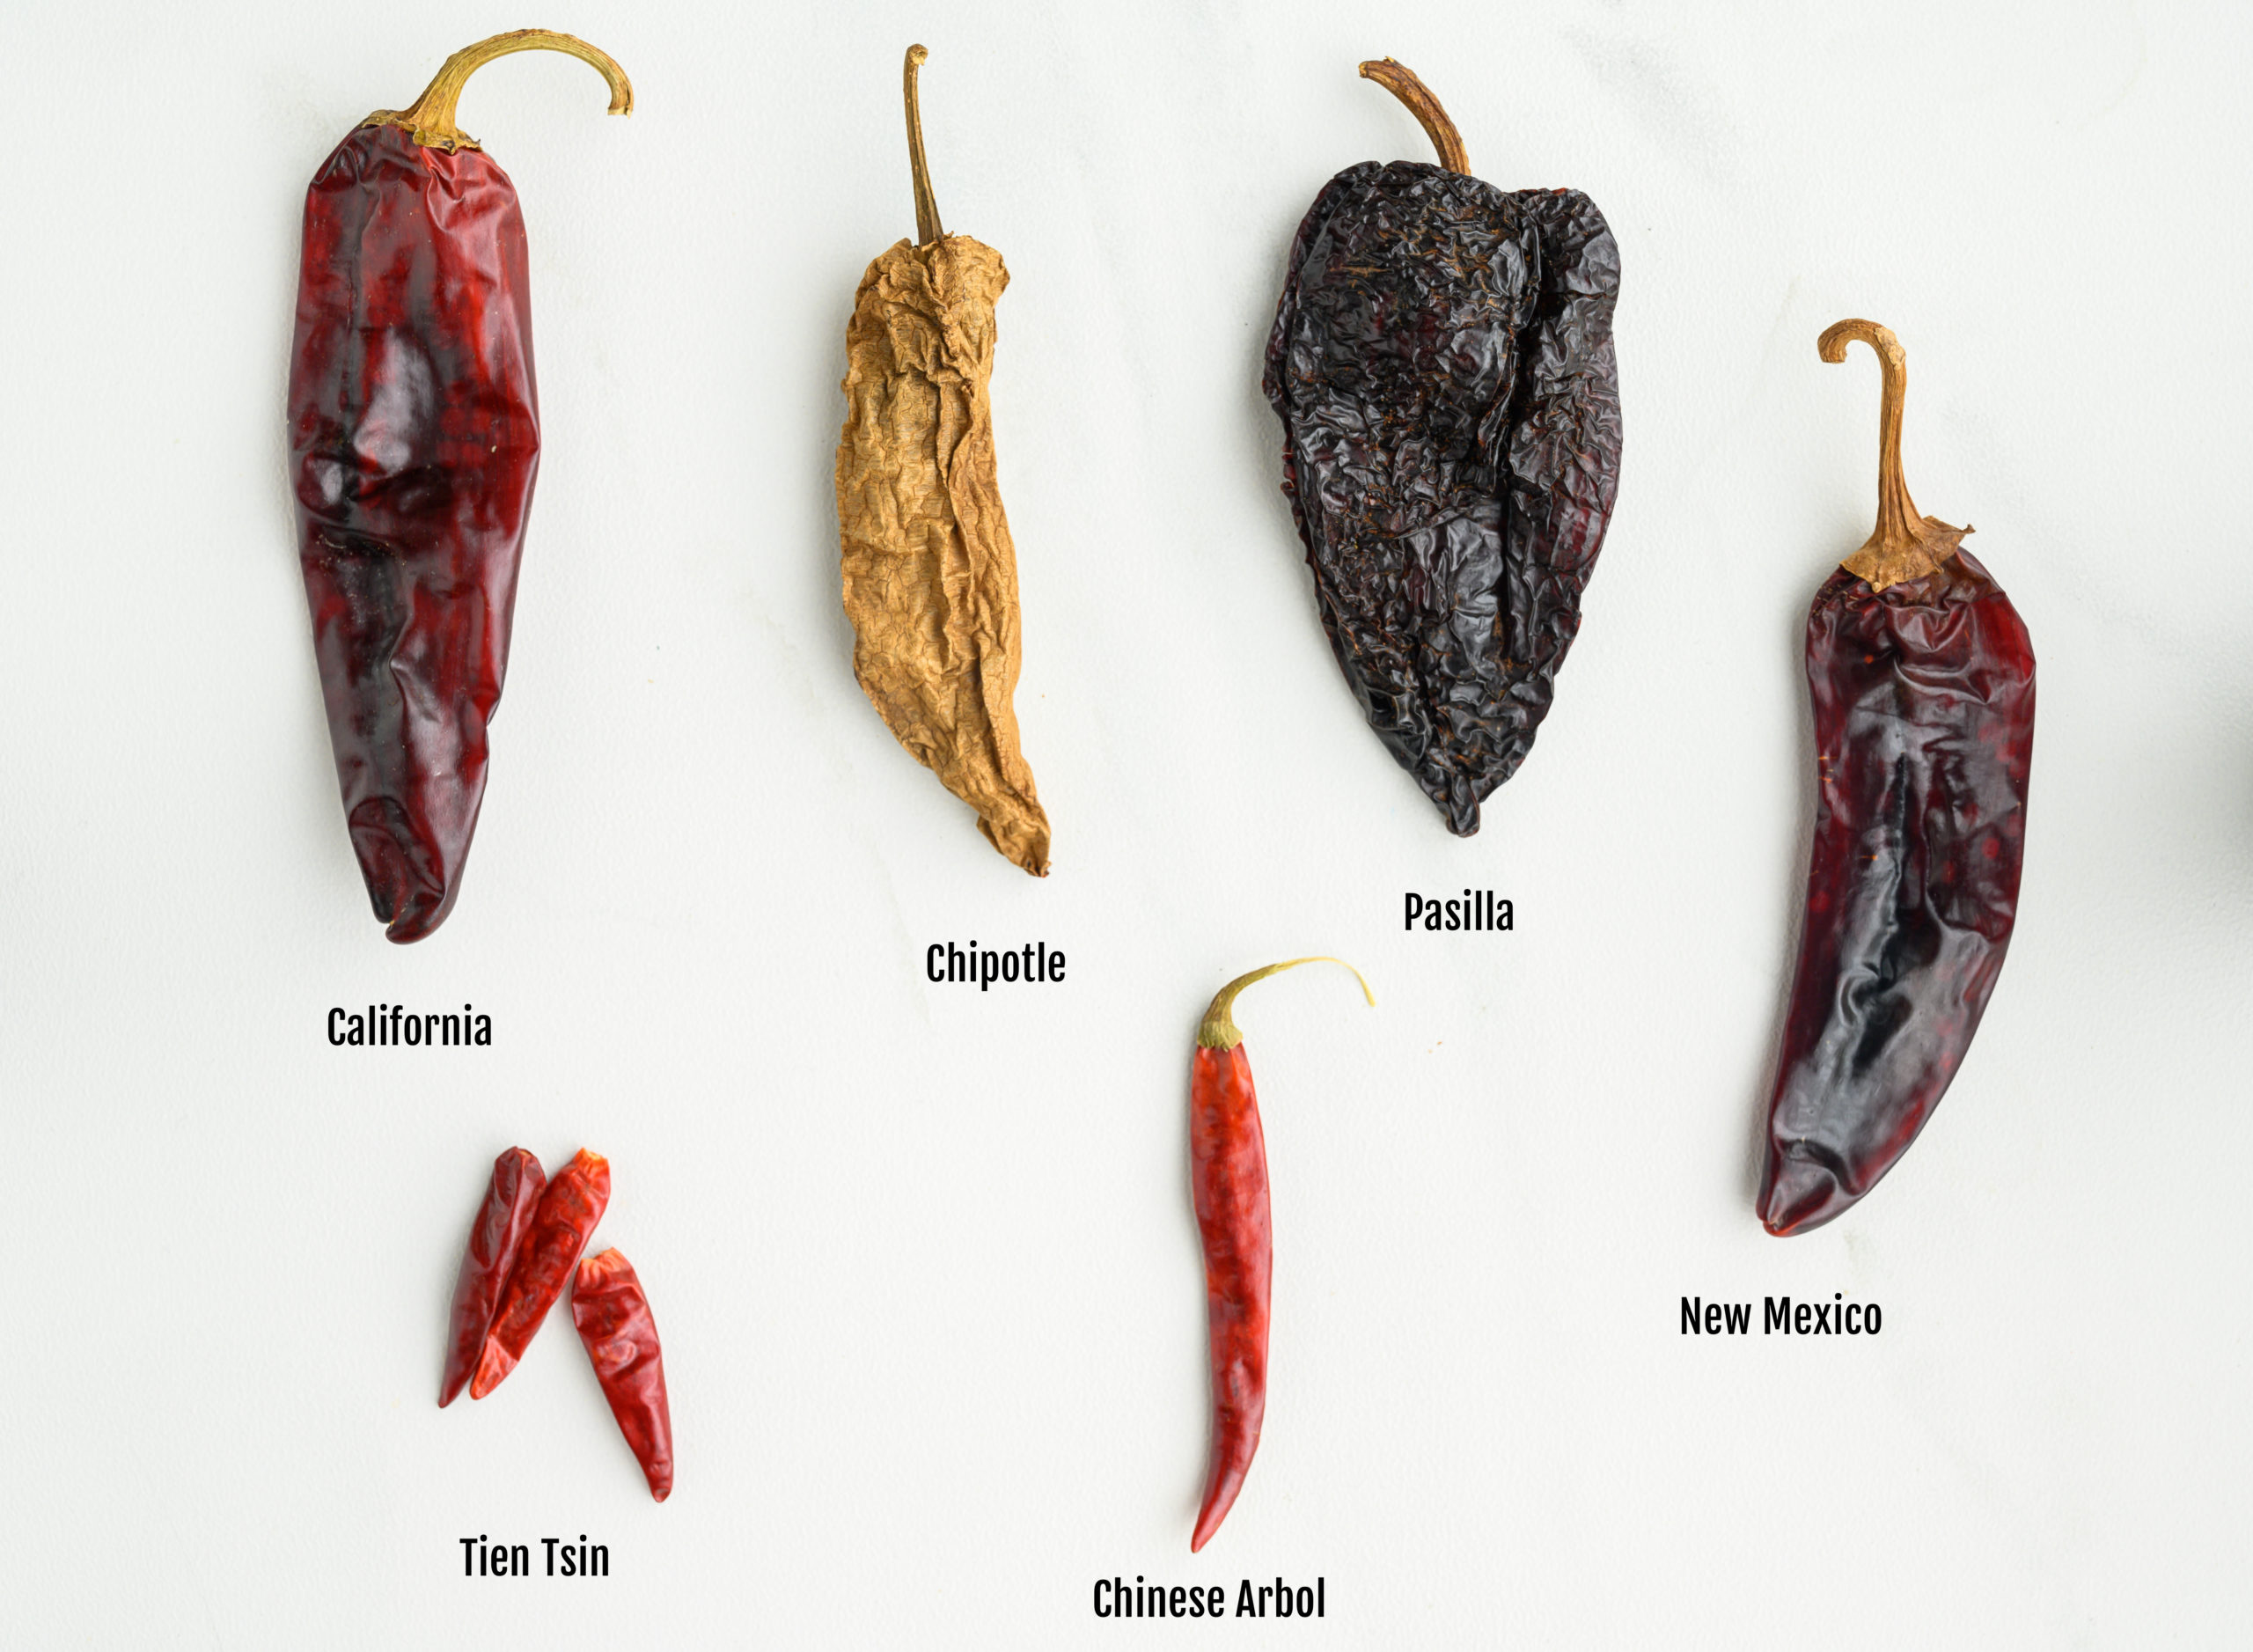 6 Ways to Make a Chile Pepper Less Spicy